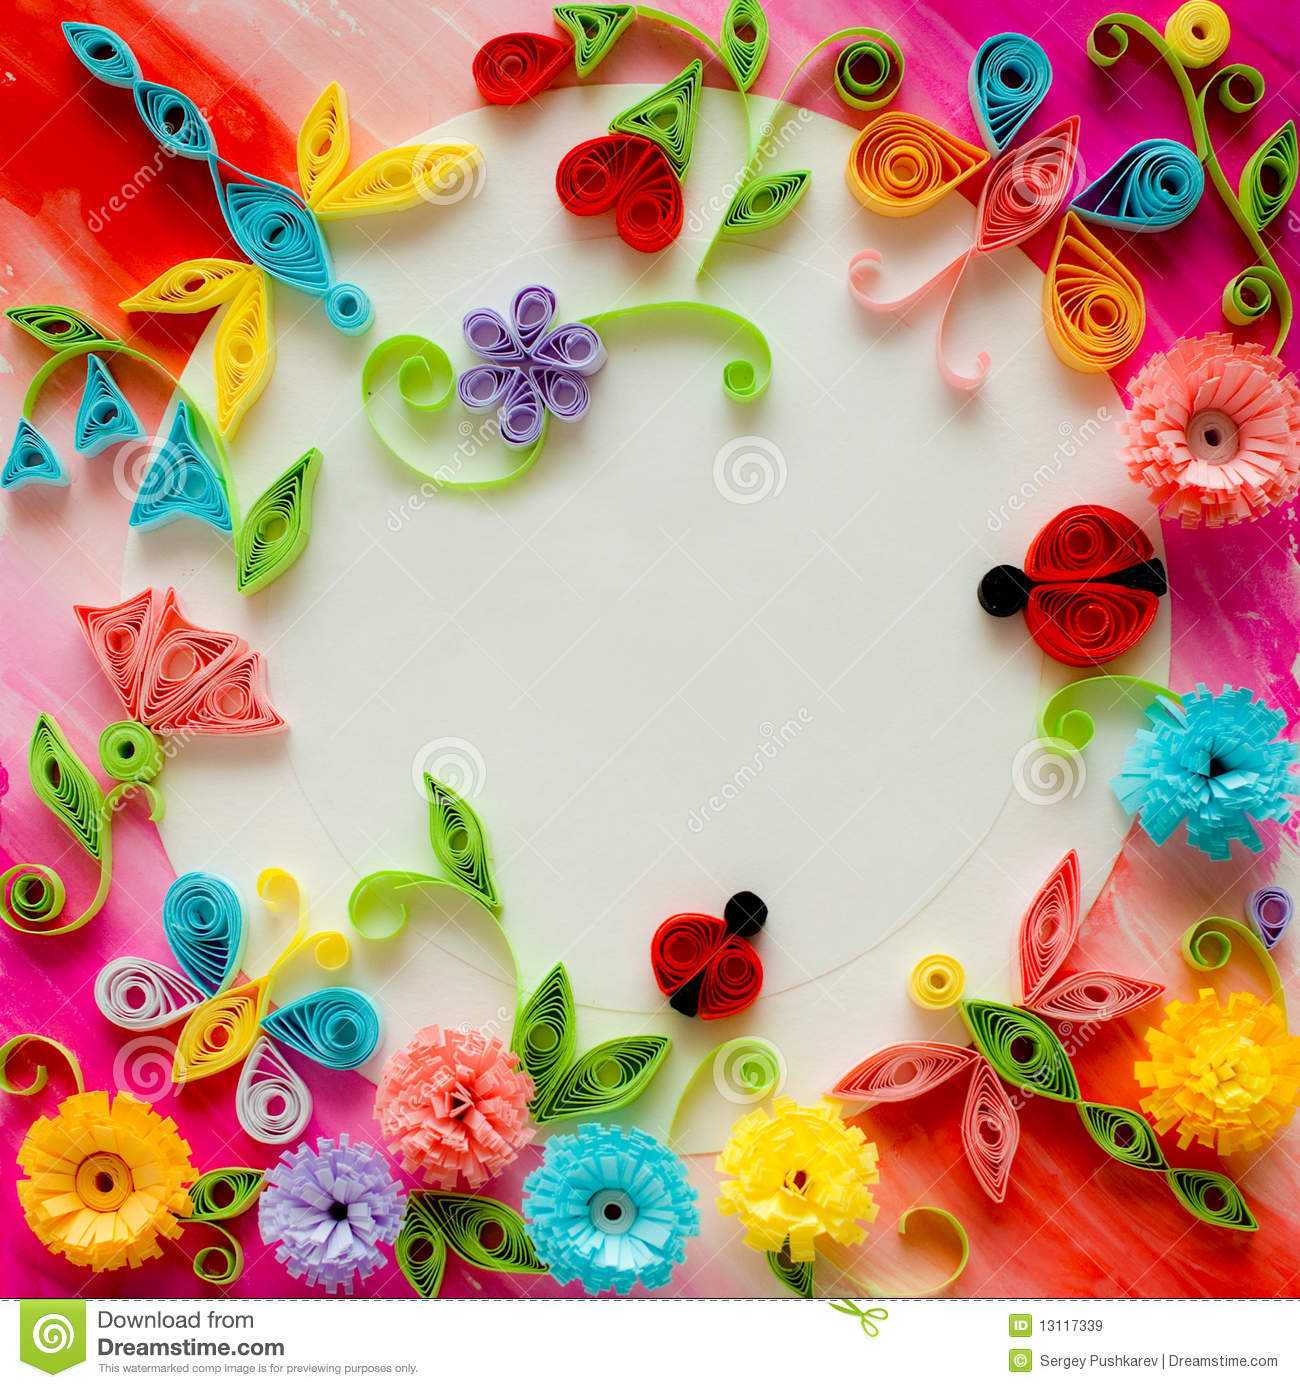 Quilling Greeting Card Blank Template Stock Image – Image Of With Free Printable Blank Greeting Card Templates